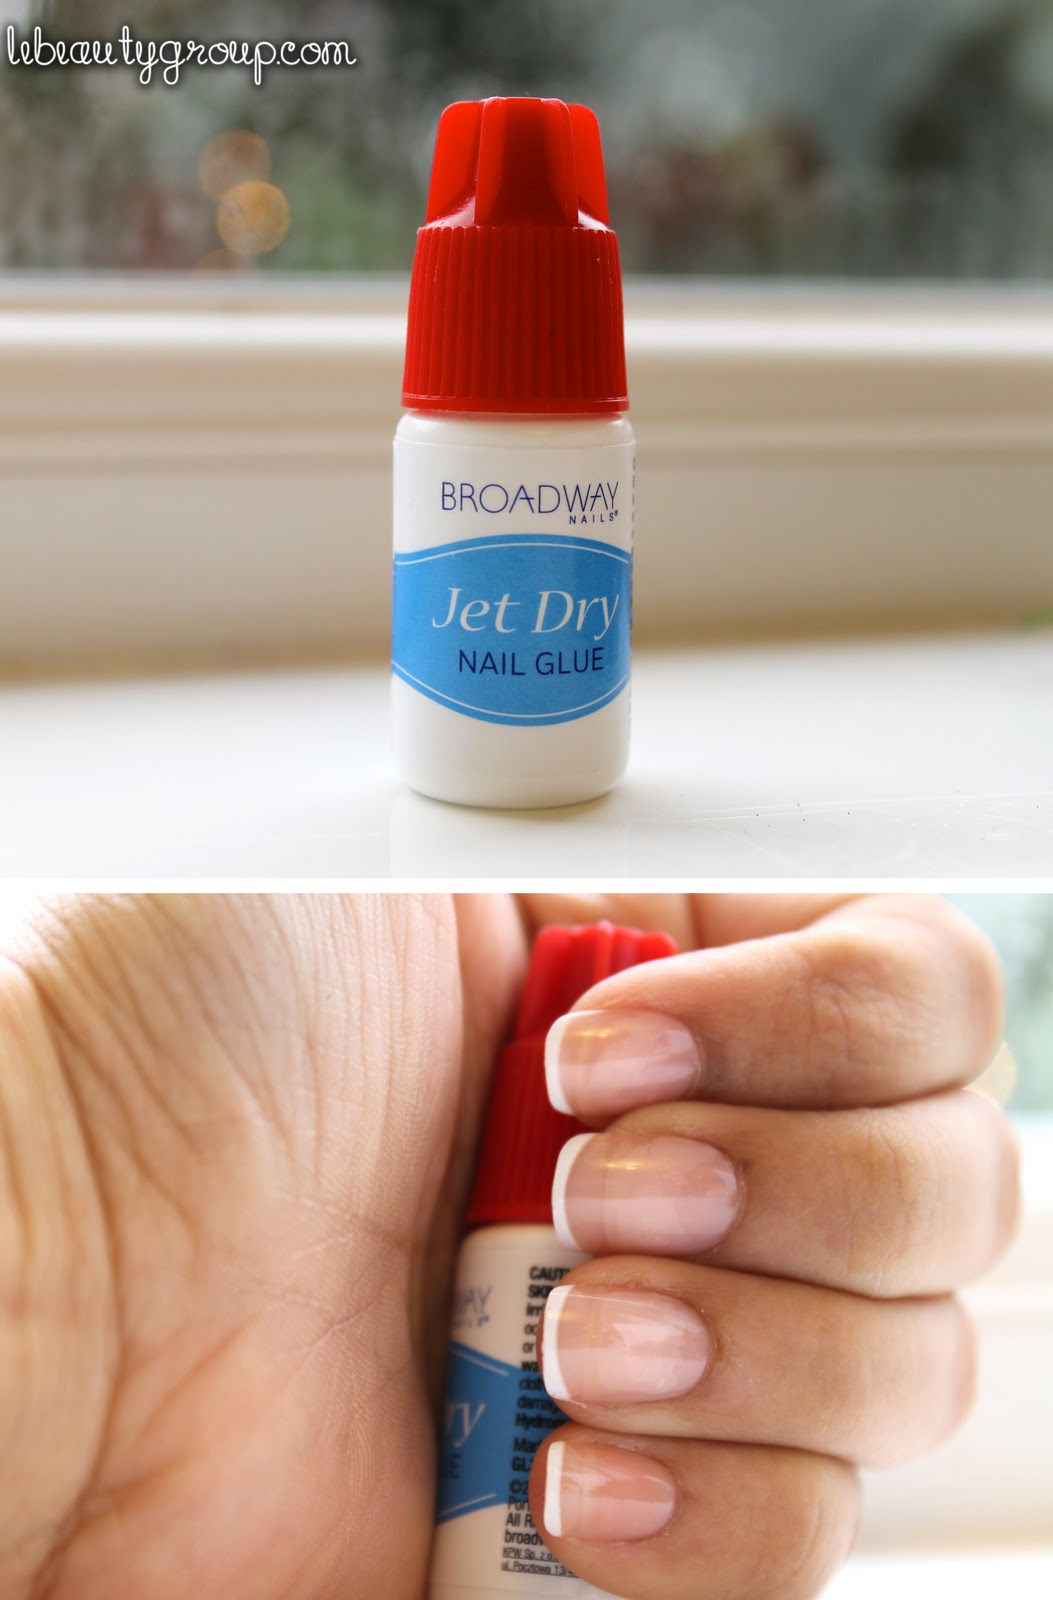 Best Nail Glue Broadway Nails Jet Dry Nail Glue (Review)